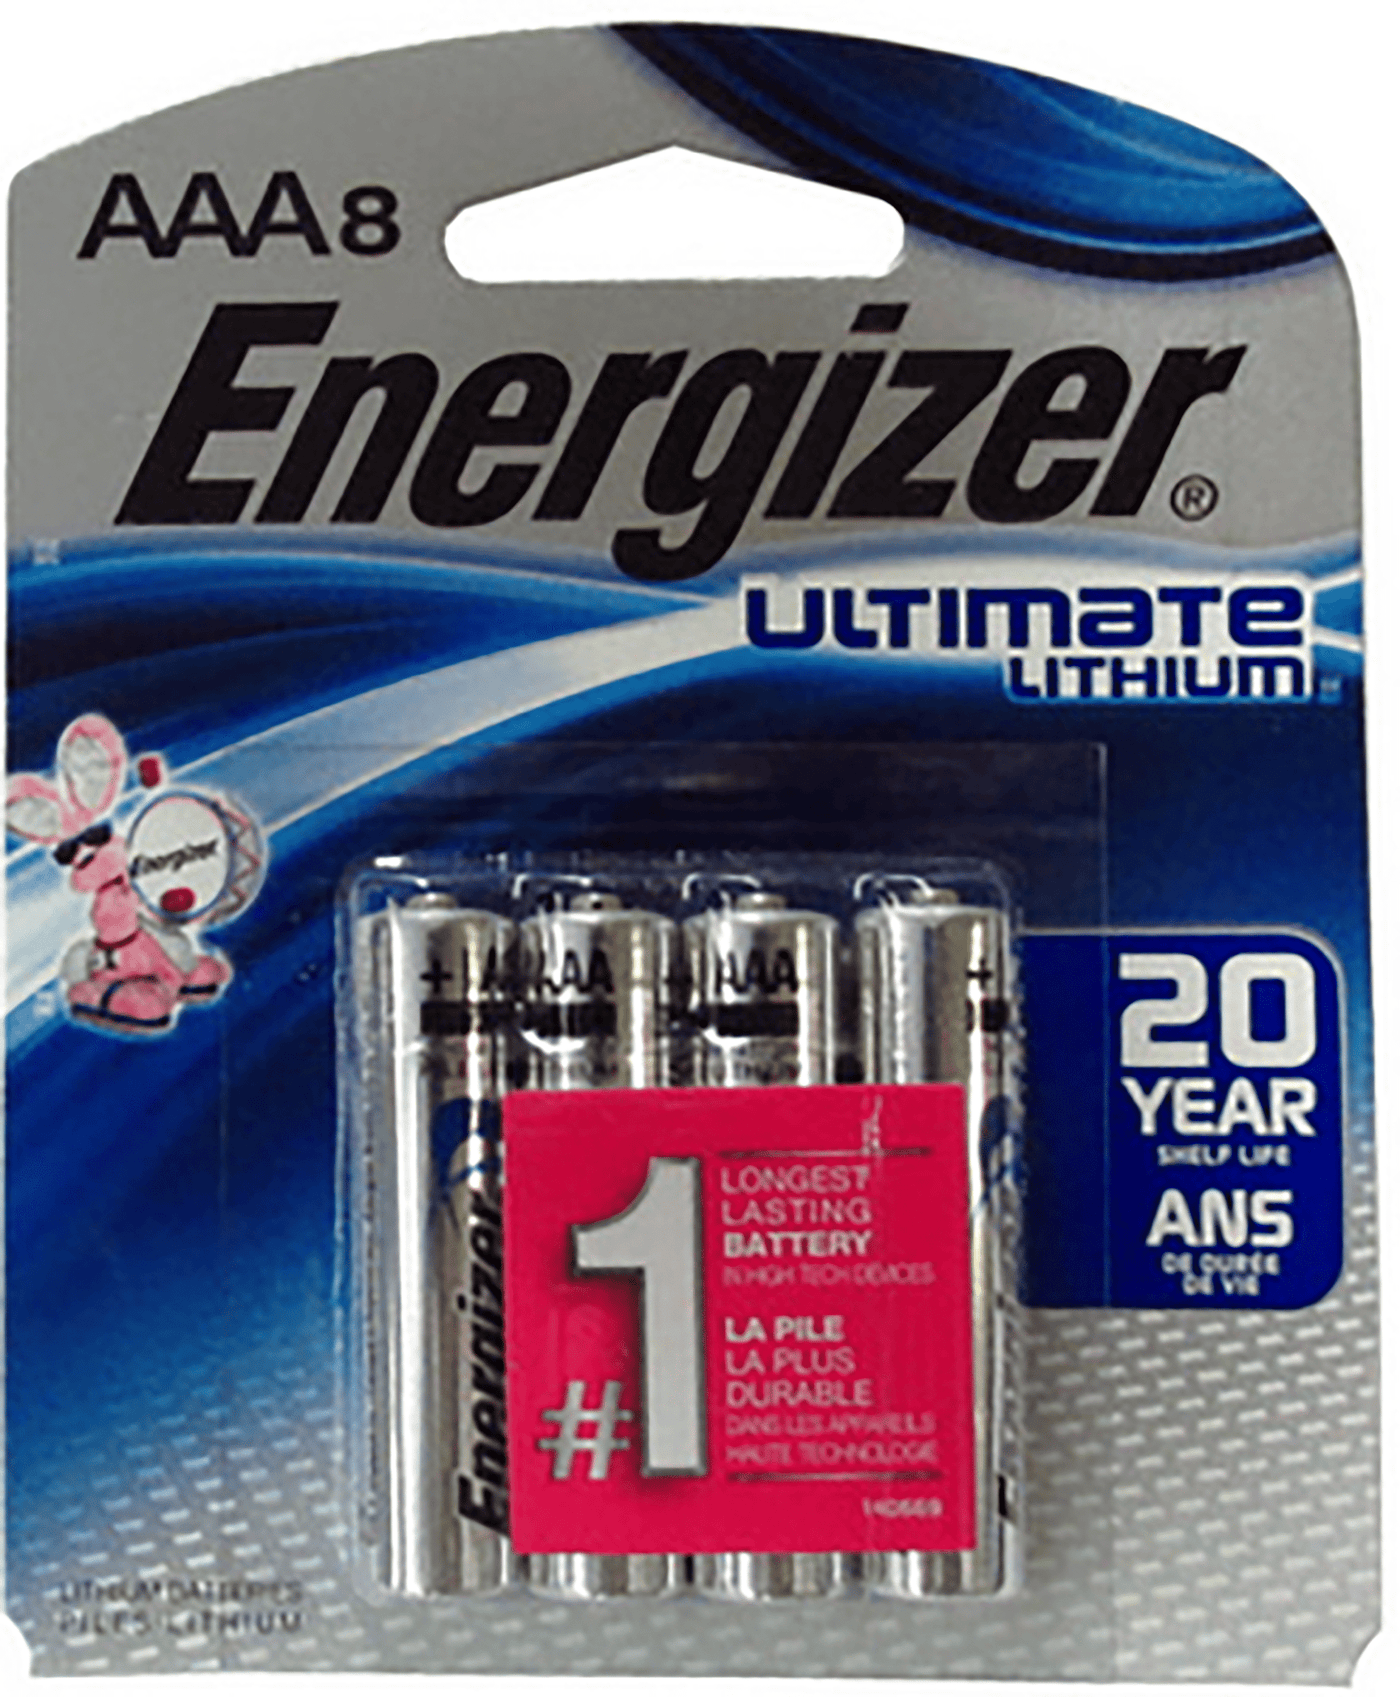 Energizer Energizer Ultimate Lithium - Batteries Aaa 8-pack Batteries